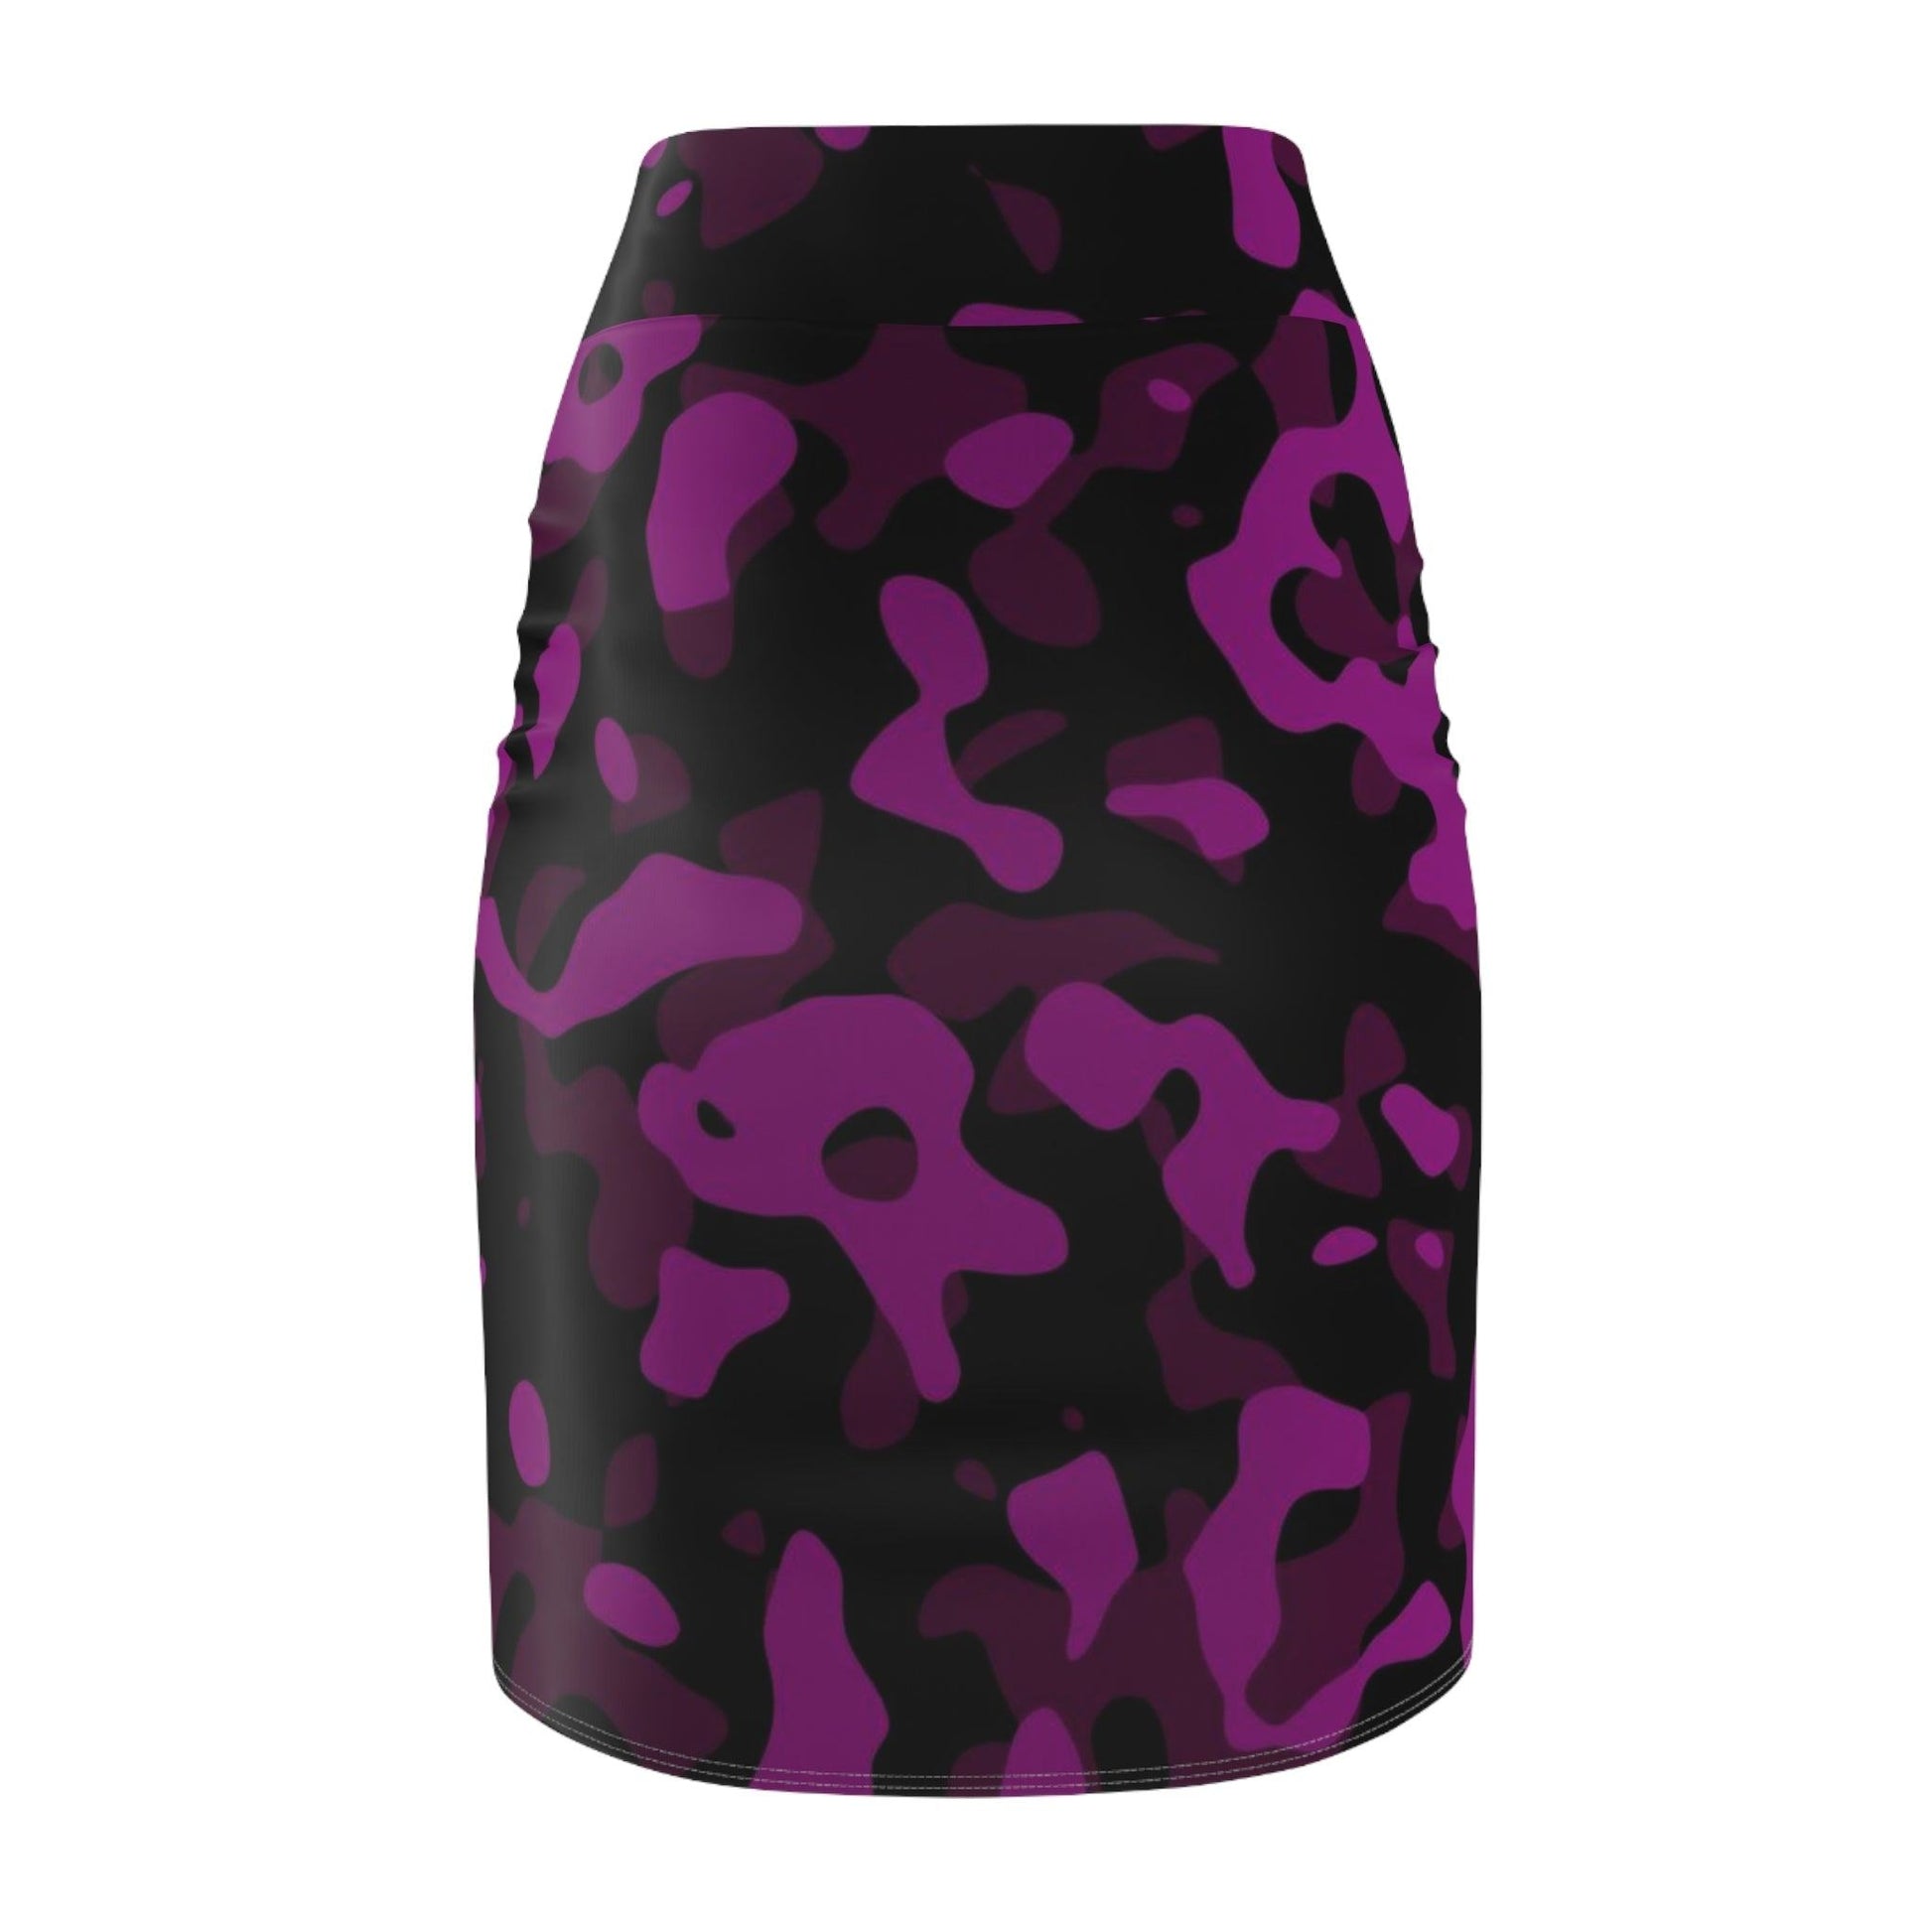 Black Pink Camouflage Bleistiftrock Bleistiftrock 74.99 All Over Print, AOP, AOP Clothing, Assembled in the USA, Assembled in USA, Black, Bleistiftrock, Camouflage, Made in the USA, Made in USA, Pink, Skirts & Dresses, Sublimation, Women's Clothing JLR Design